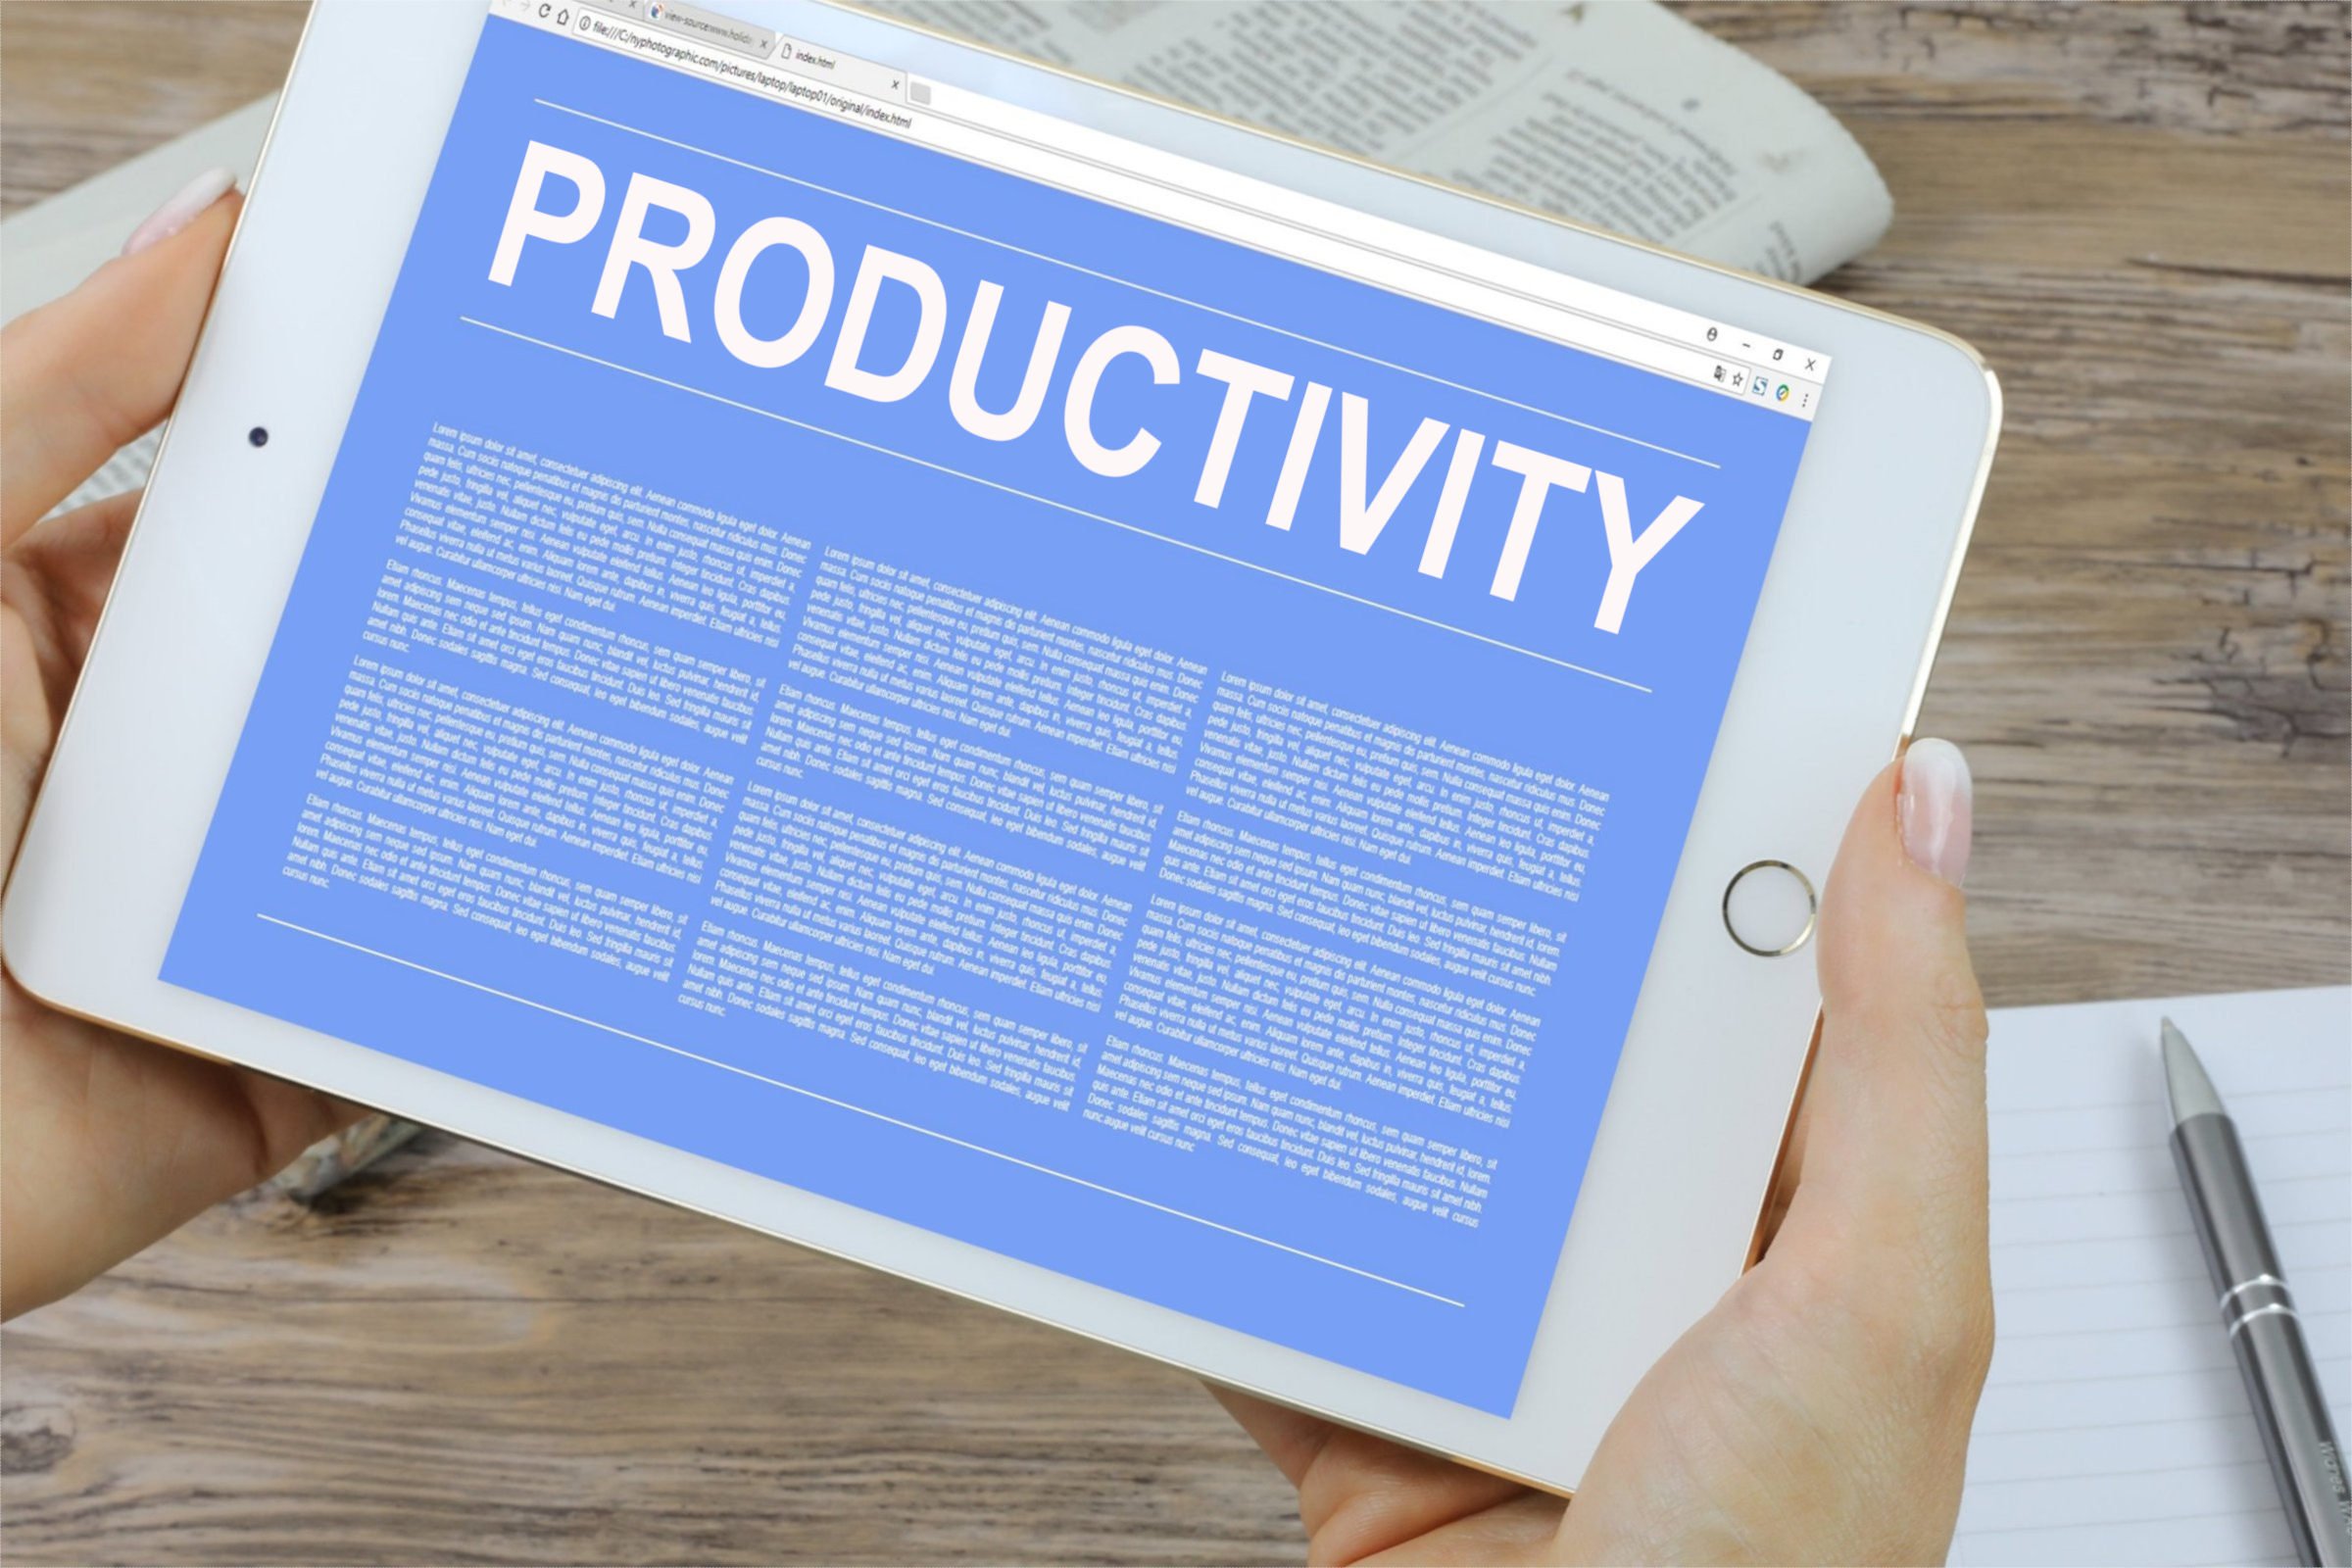 Productivity Tools for Streamlining the Outplacement Process